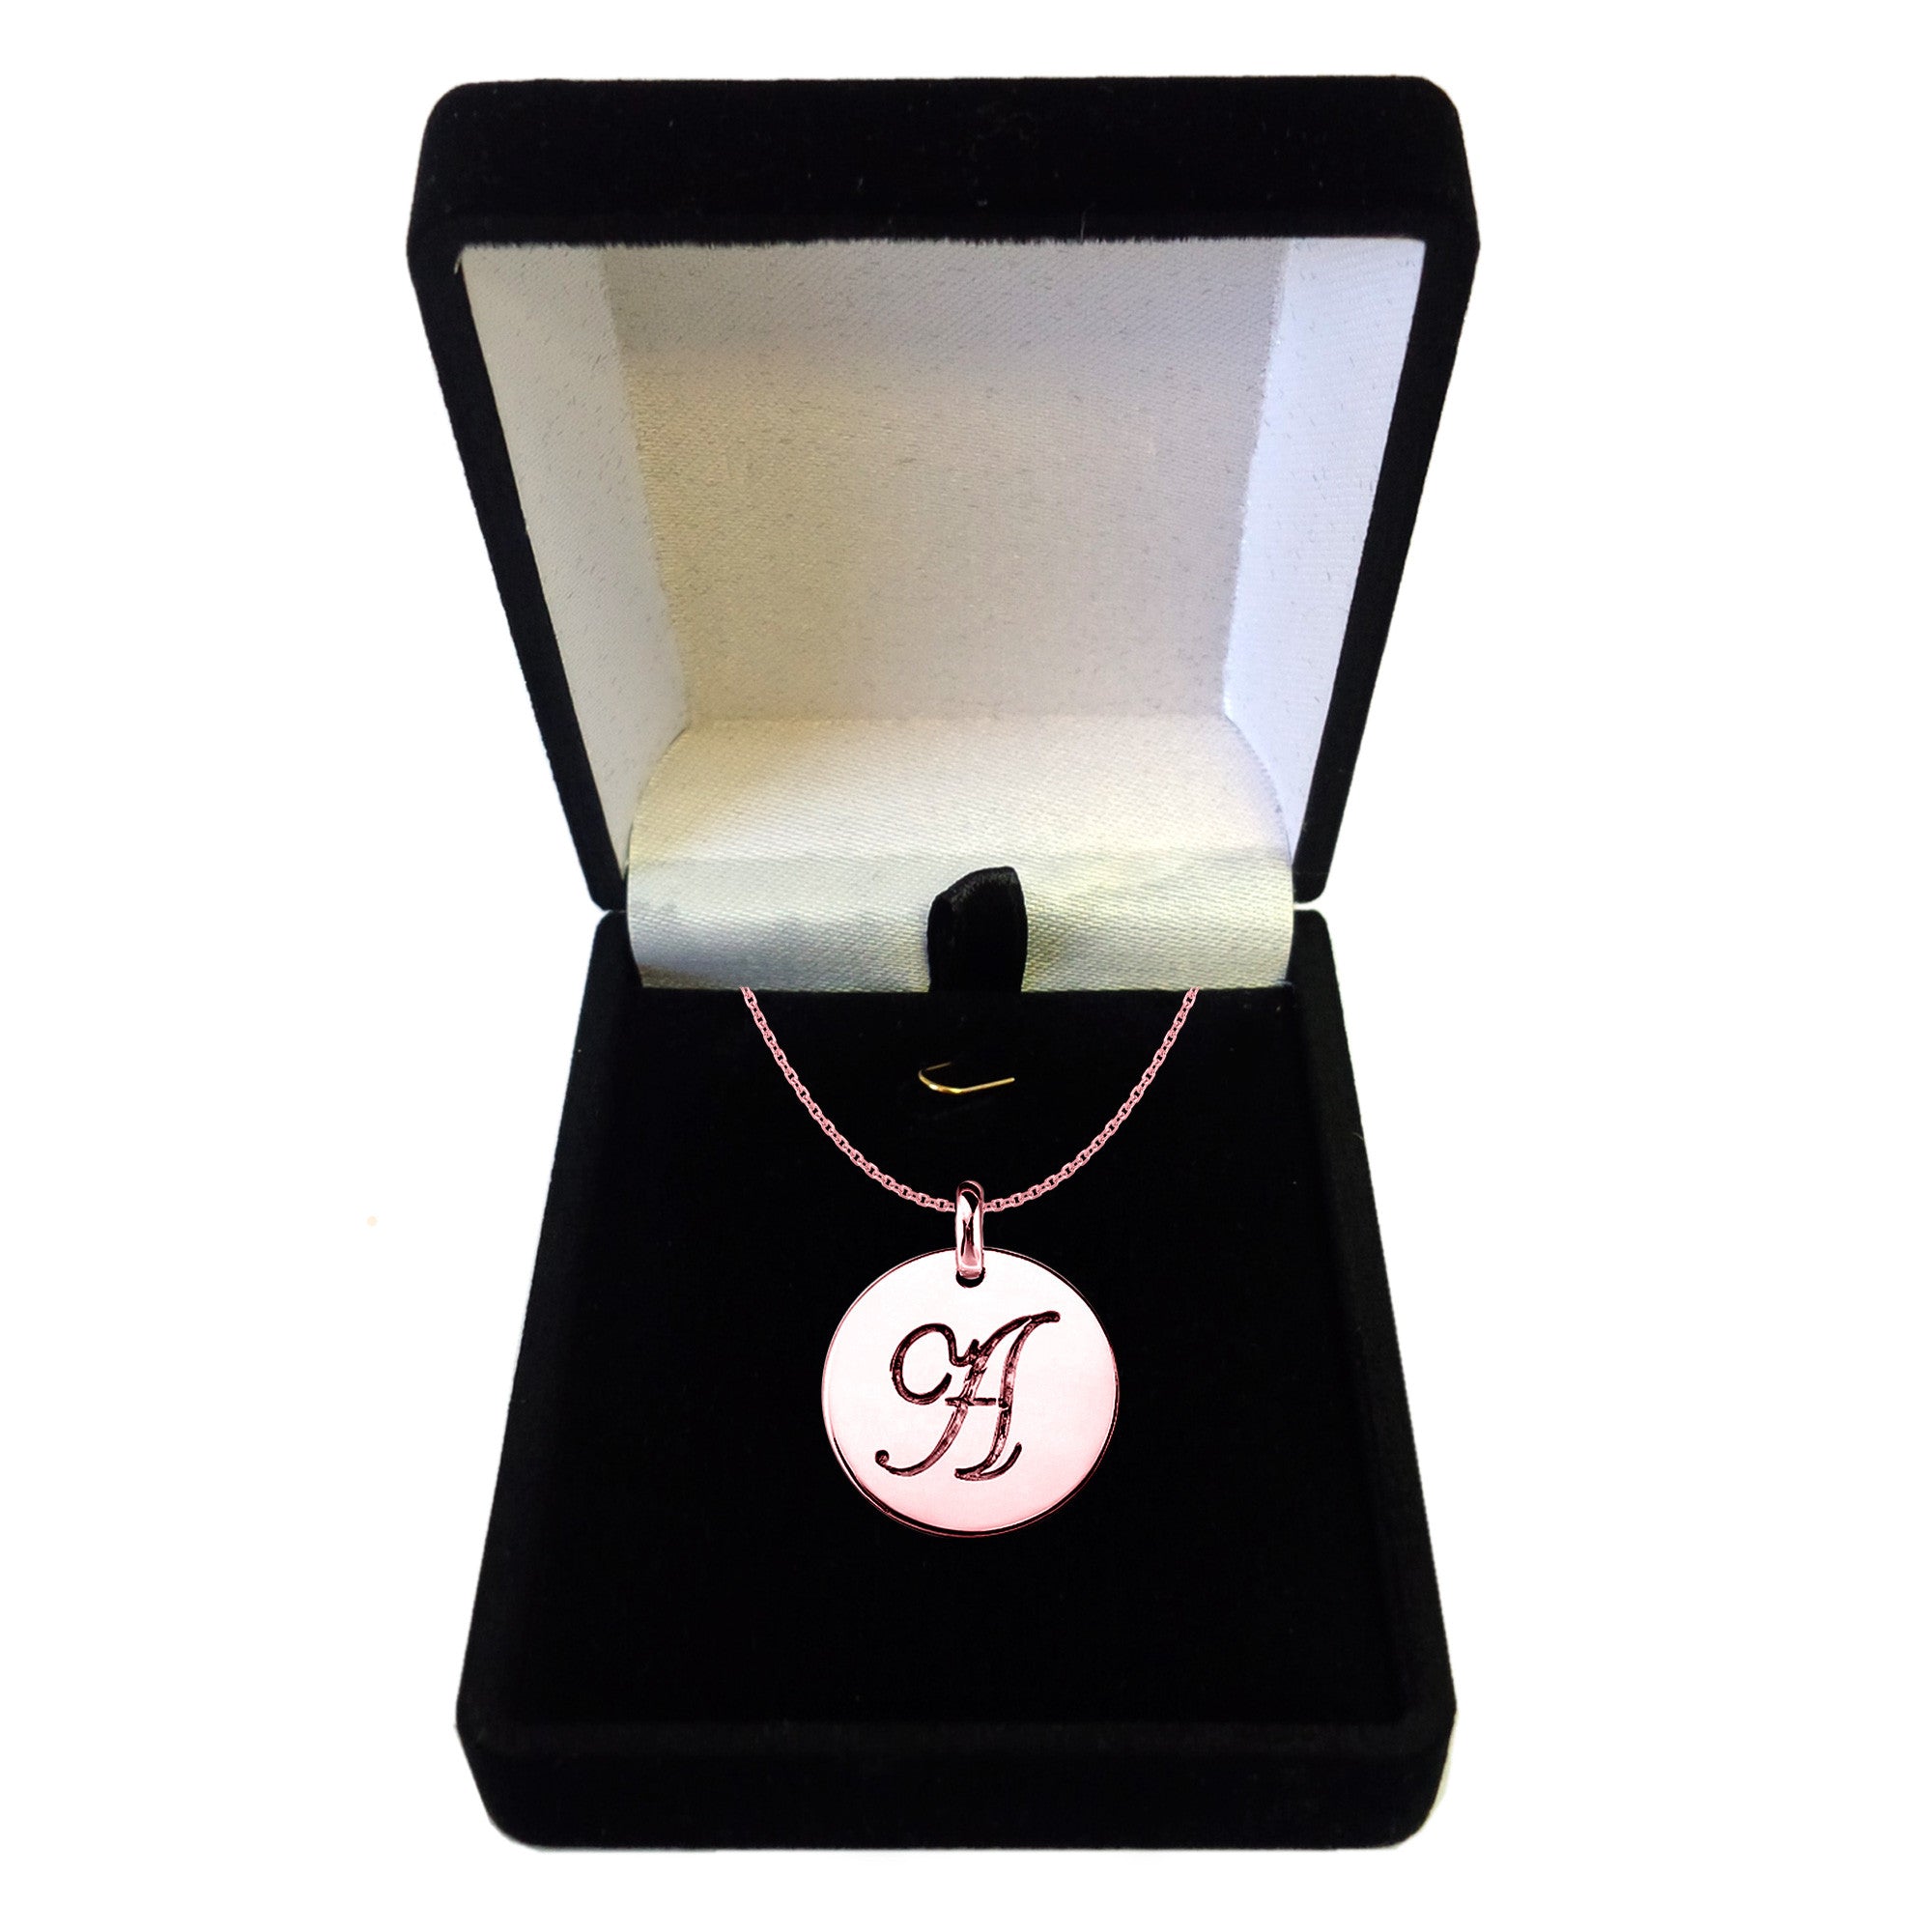 "A" 14K Rose Gold Script Engraved Initial Disk Pendant fine designer jewelry for men and women